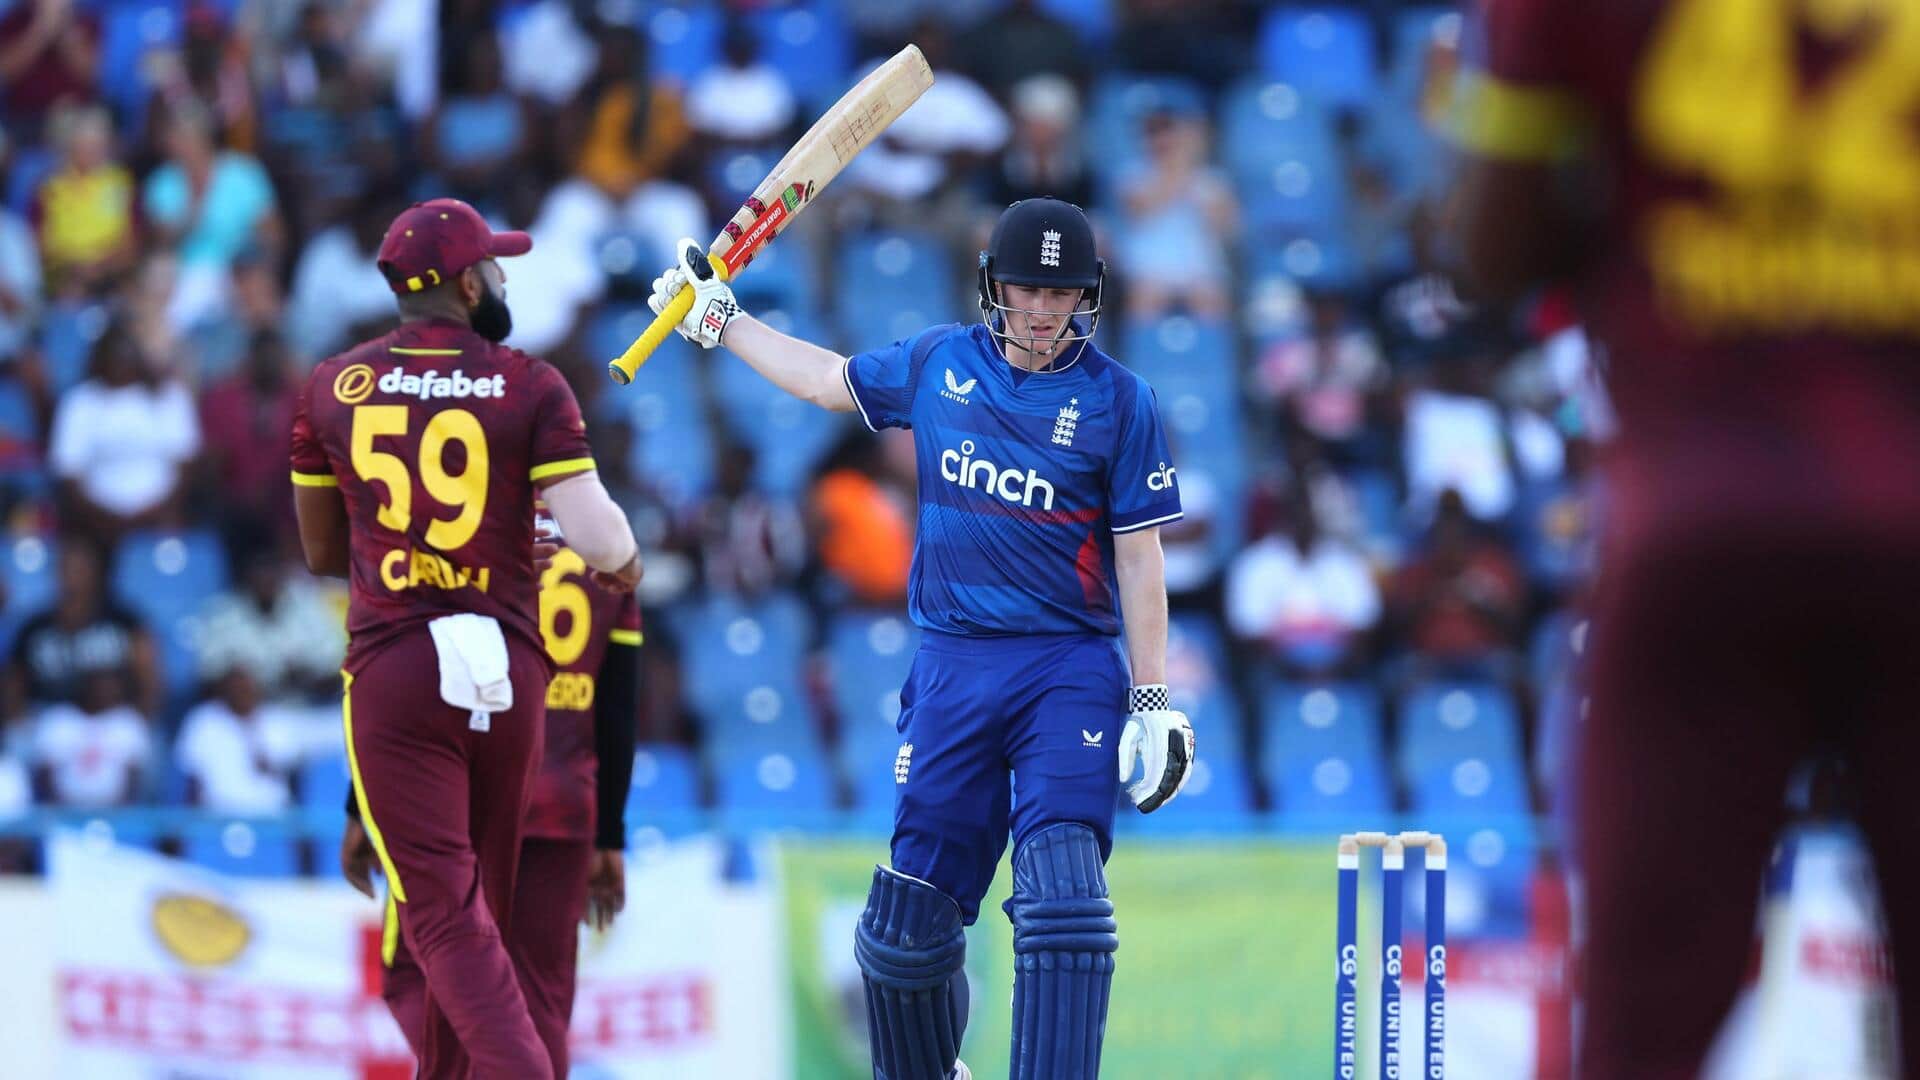 2nd ODI: Can England stage a comeback against West Indies?